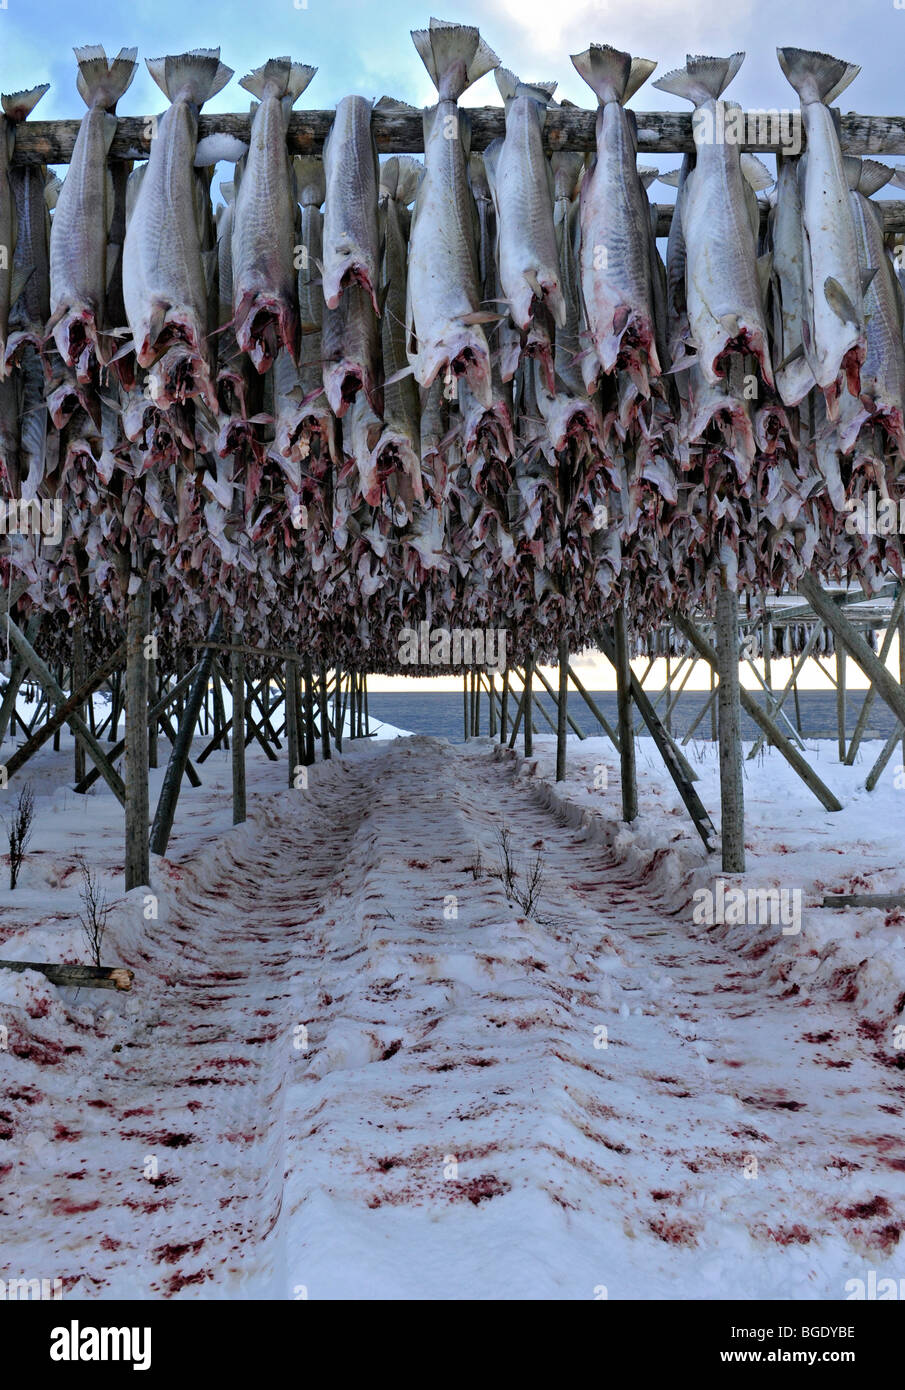 Cod hanging to dry on a fishing rack. Fish blood in the snow underneath. Stock Photo